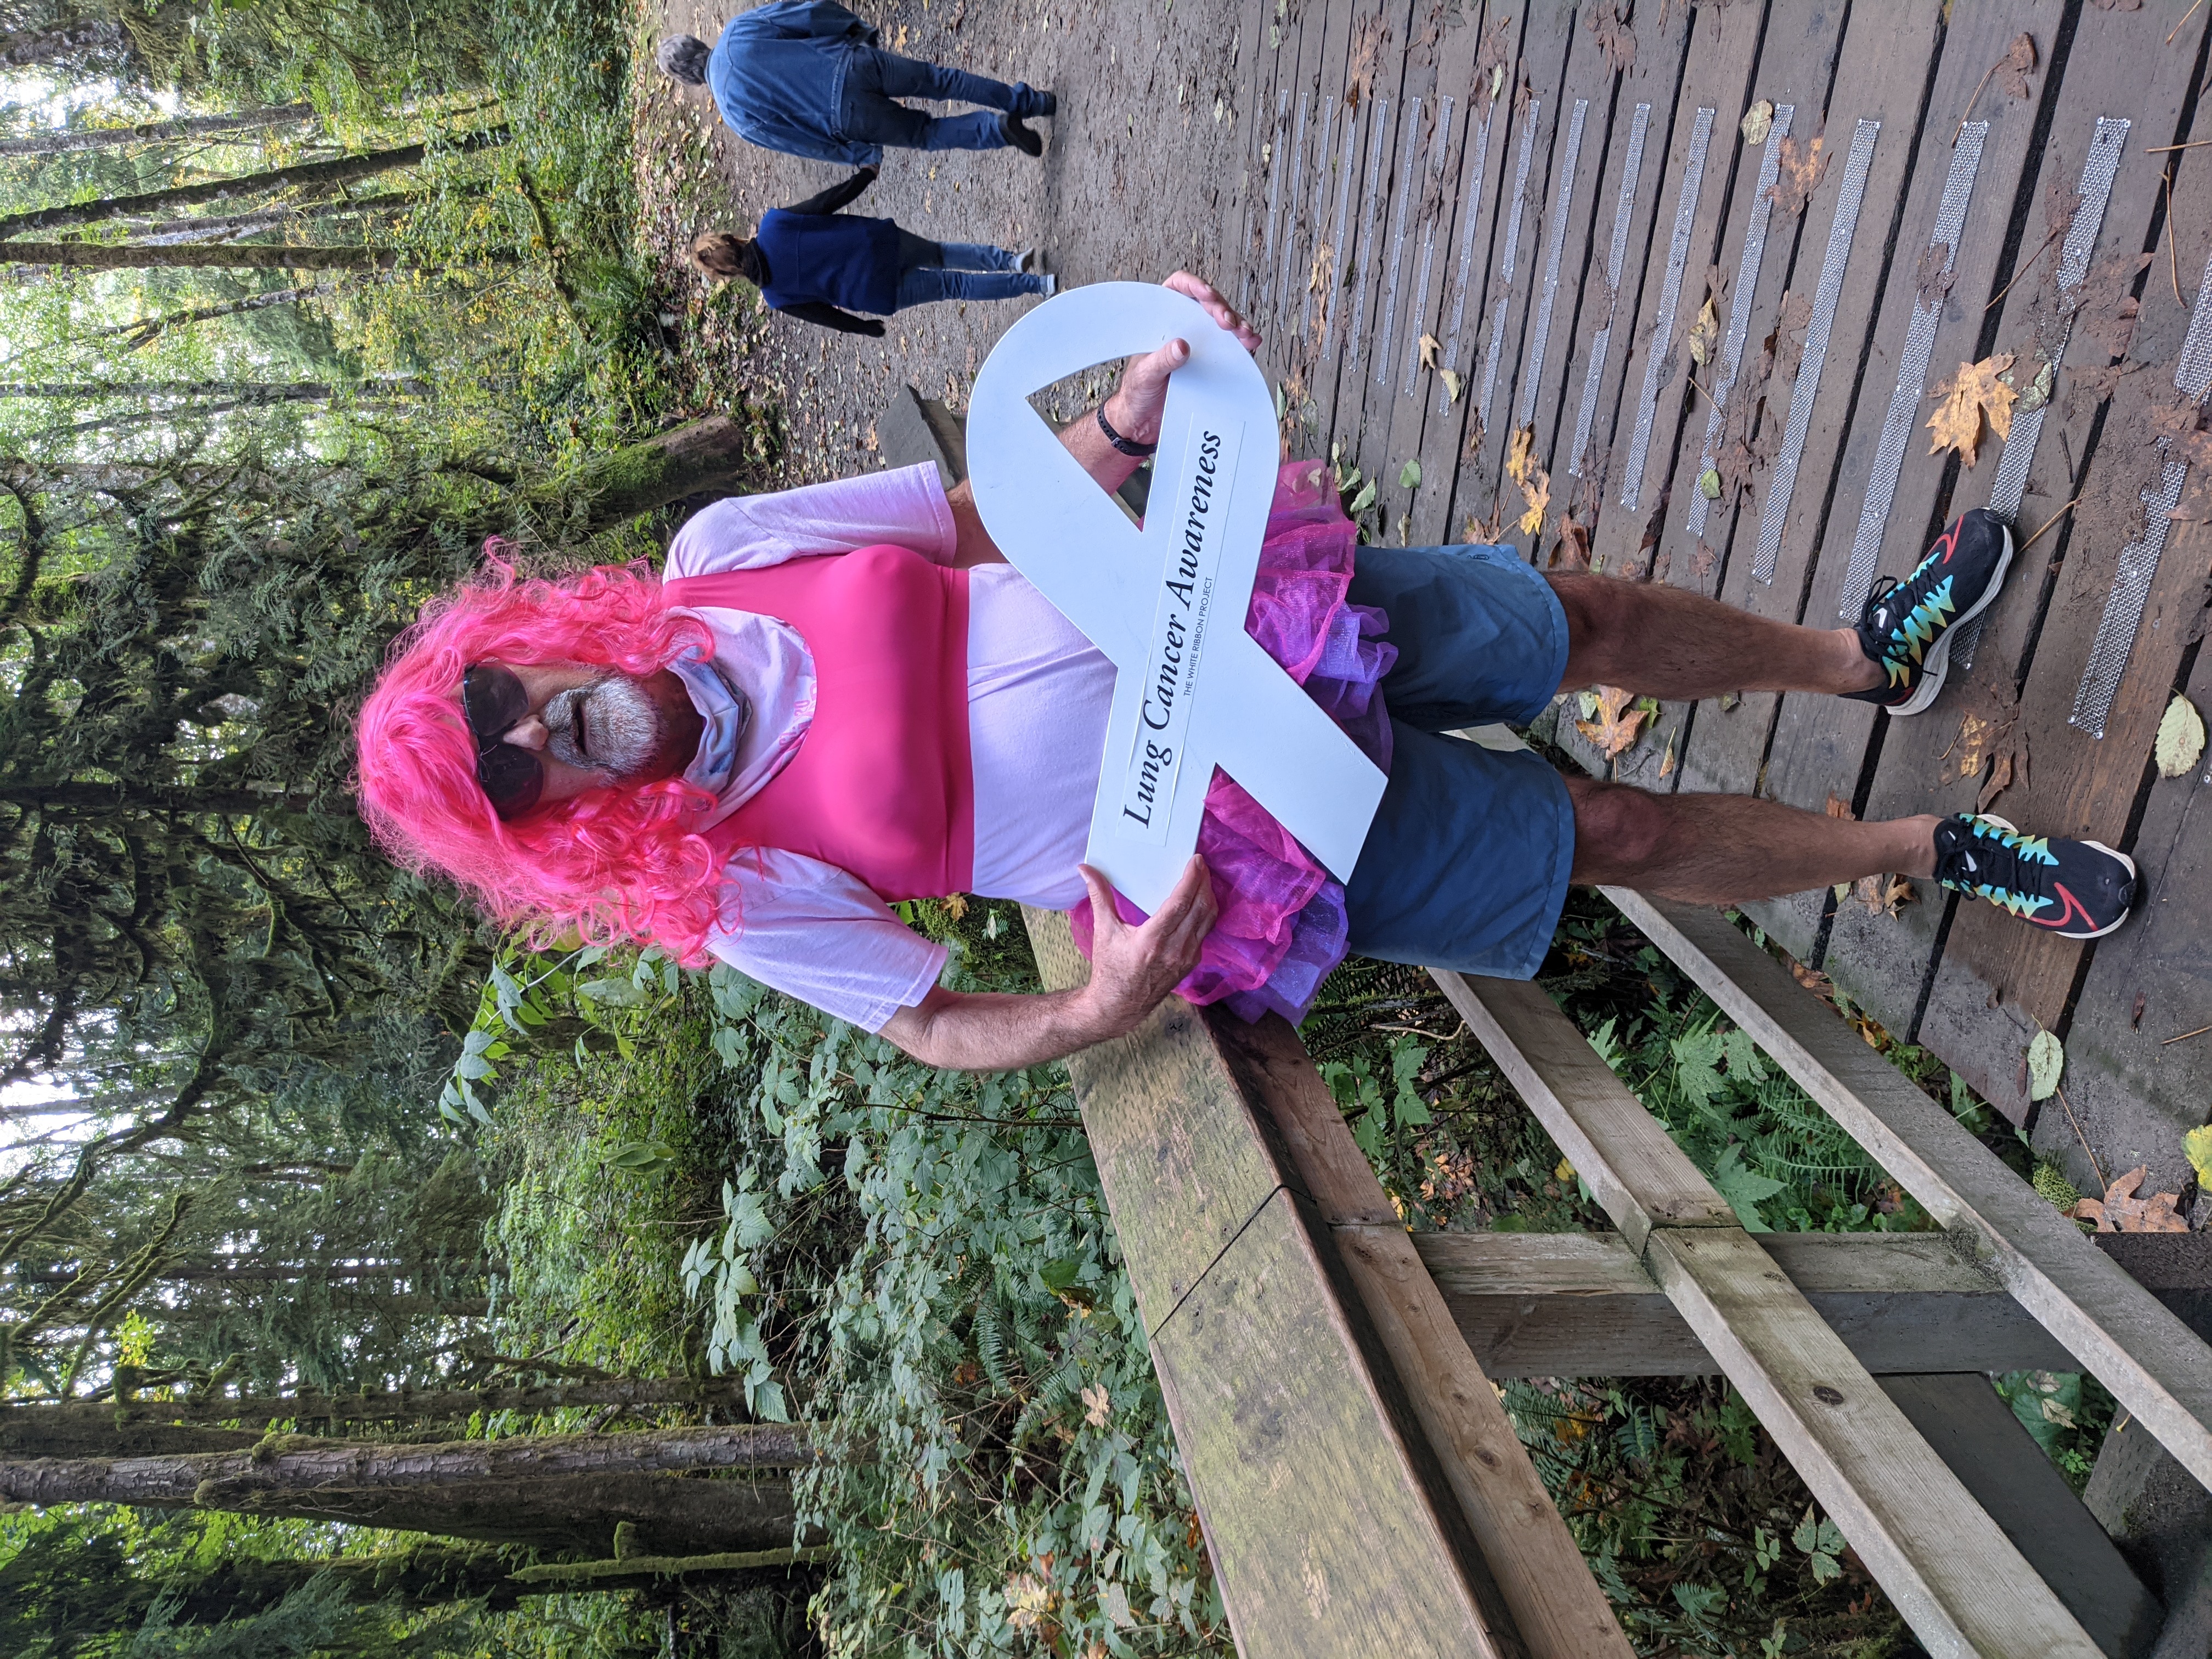 Standing on a bridge with a pink wig, pink bra and a pink tutu holding a White Ribbon for lung cancer awareness.